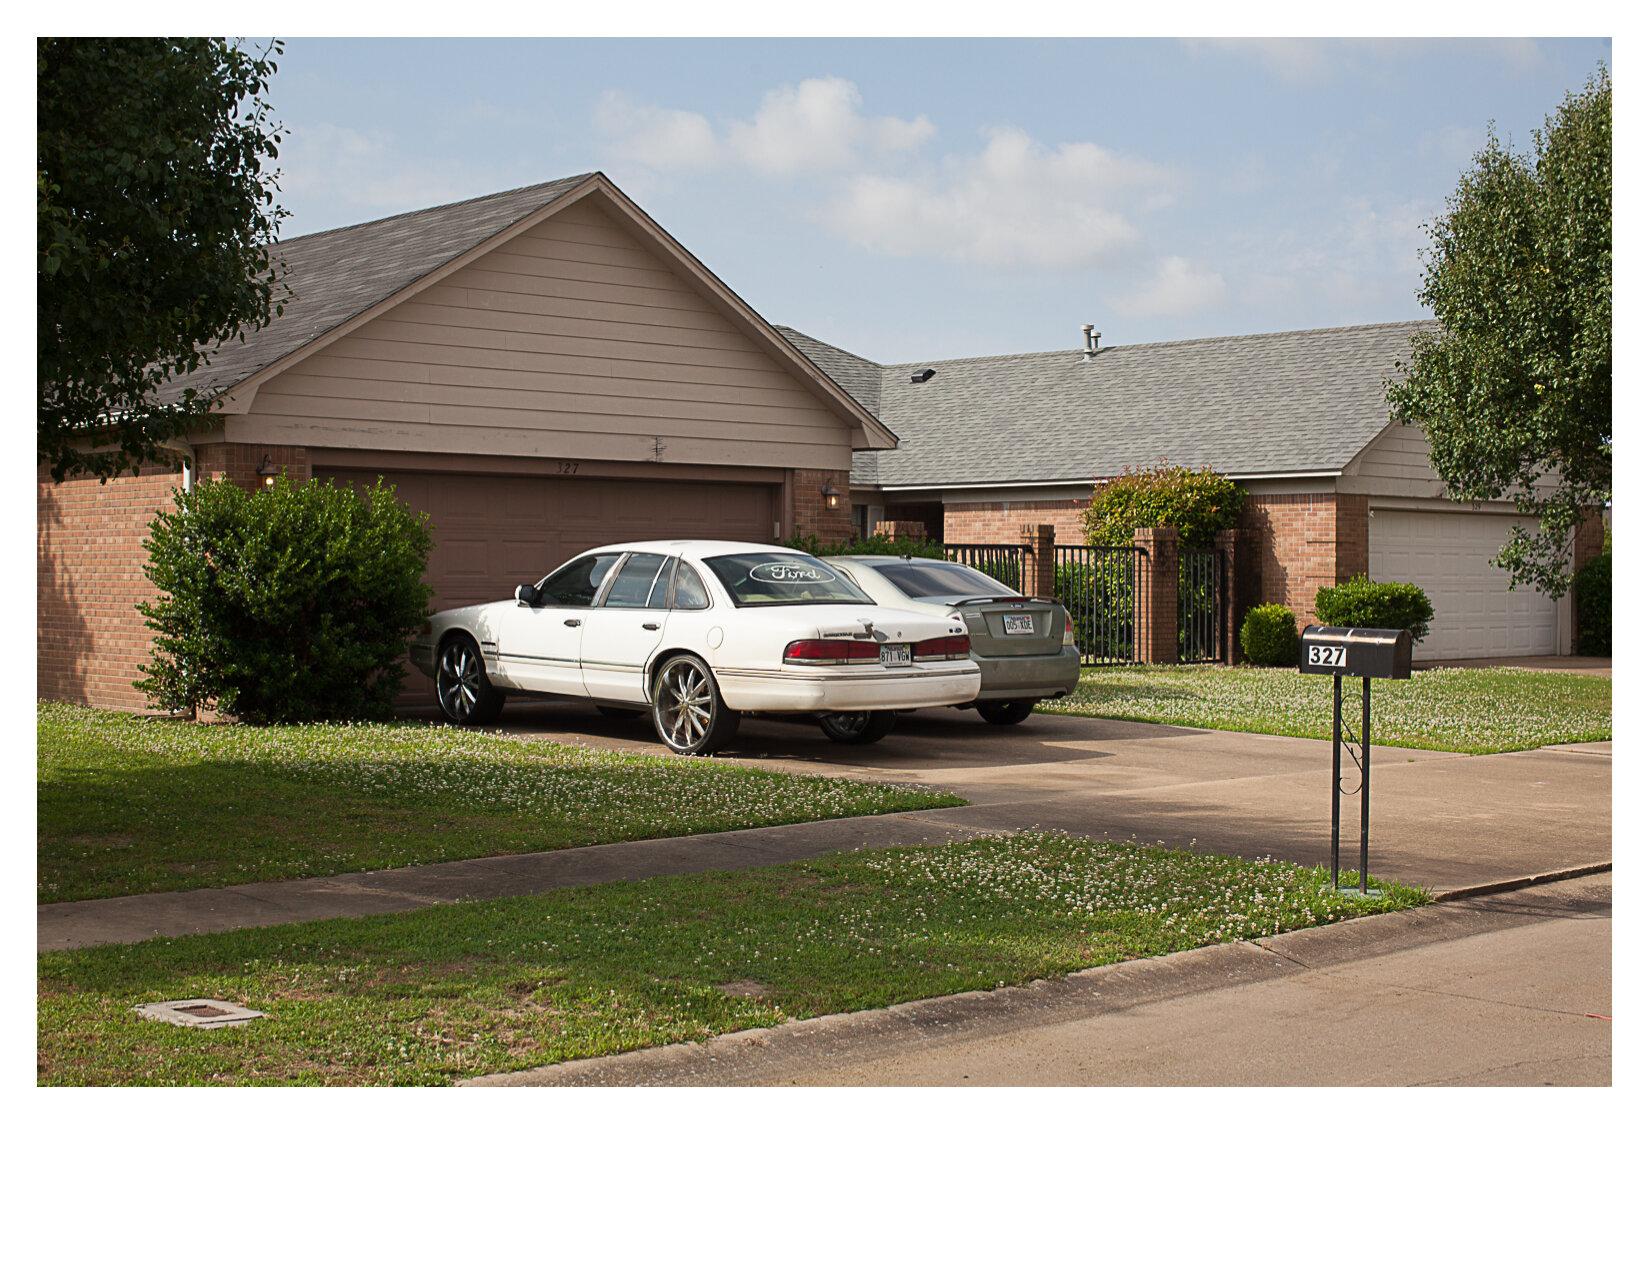 Cars in Driveway, Lakes at Richland Subdivision, West Memphis, AR